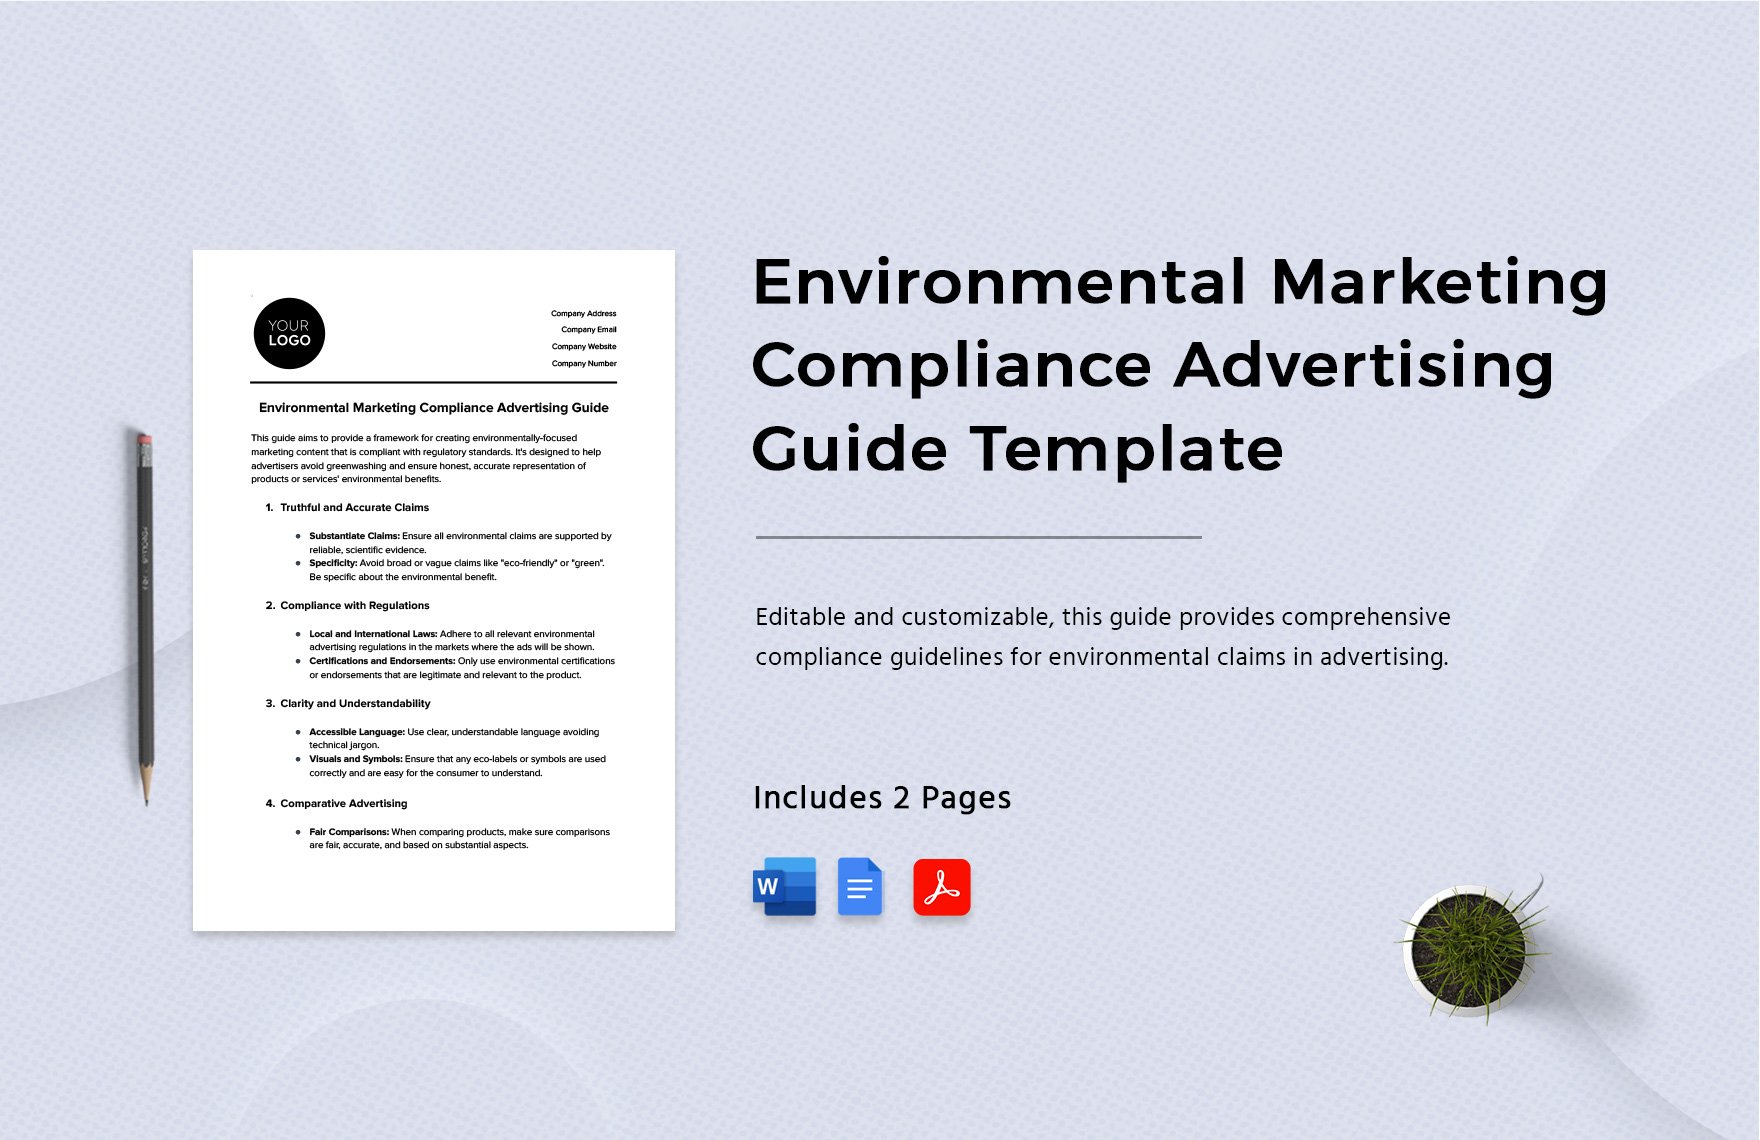 Environmental Marketing Compliance Advertising Guide Template